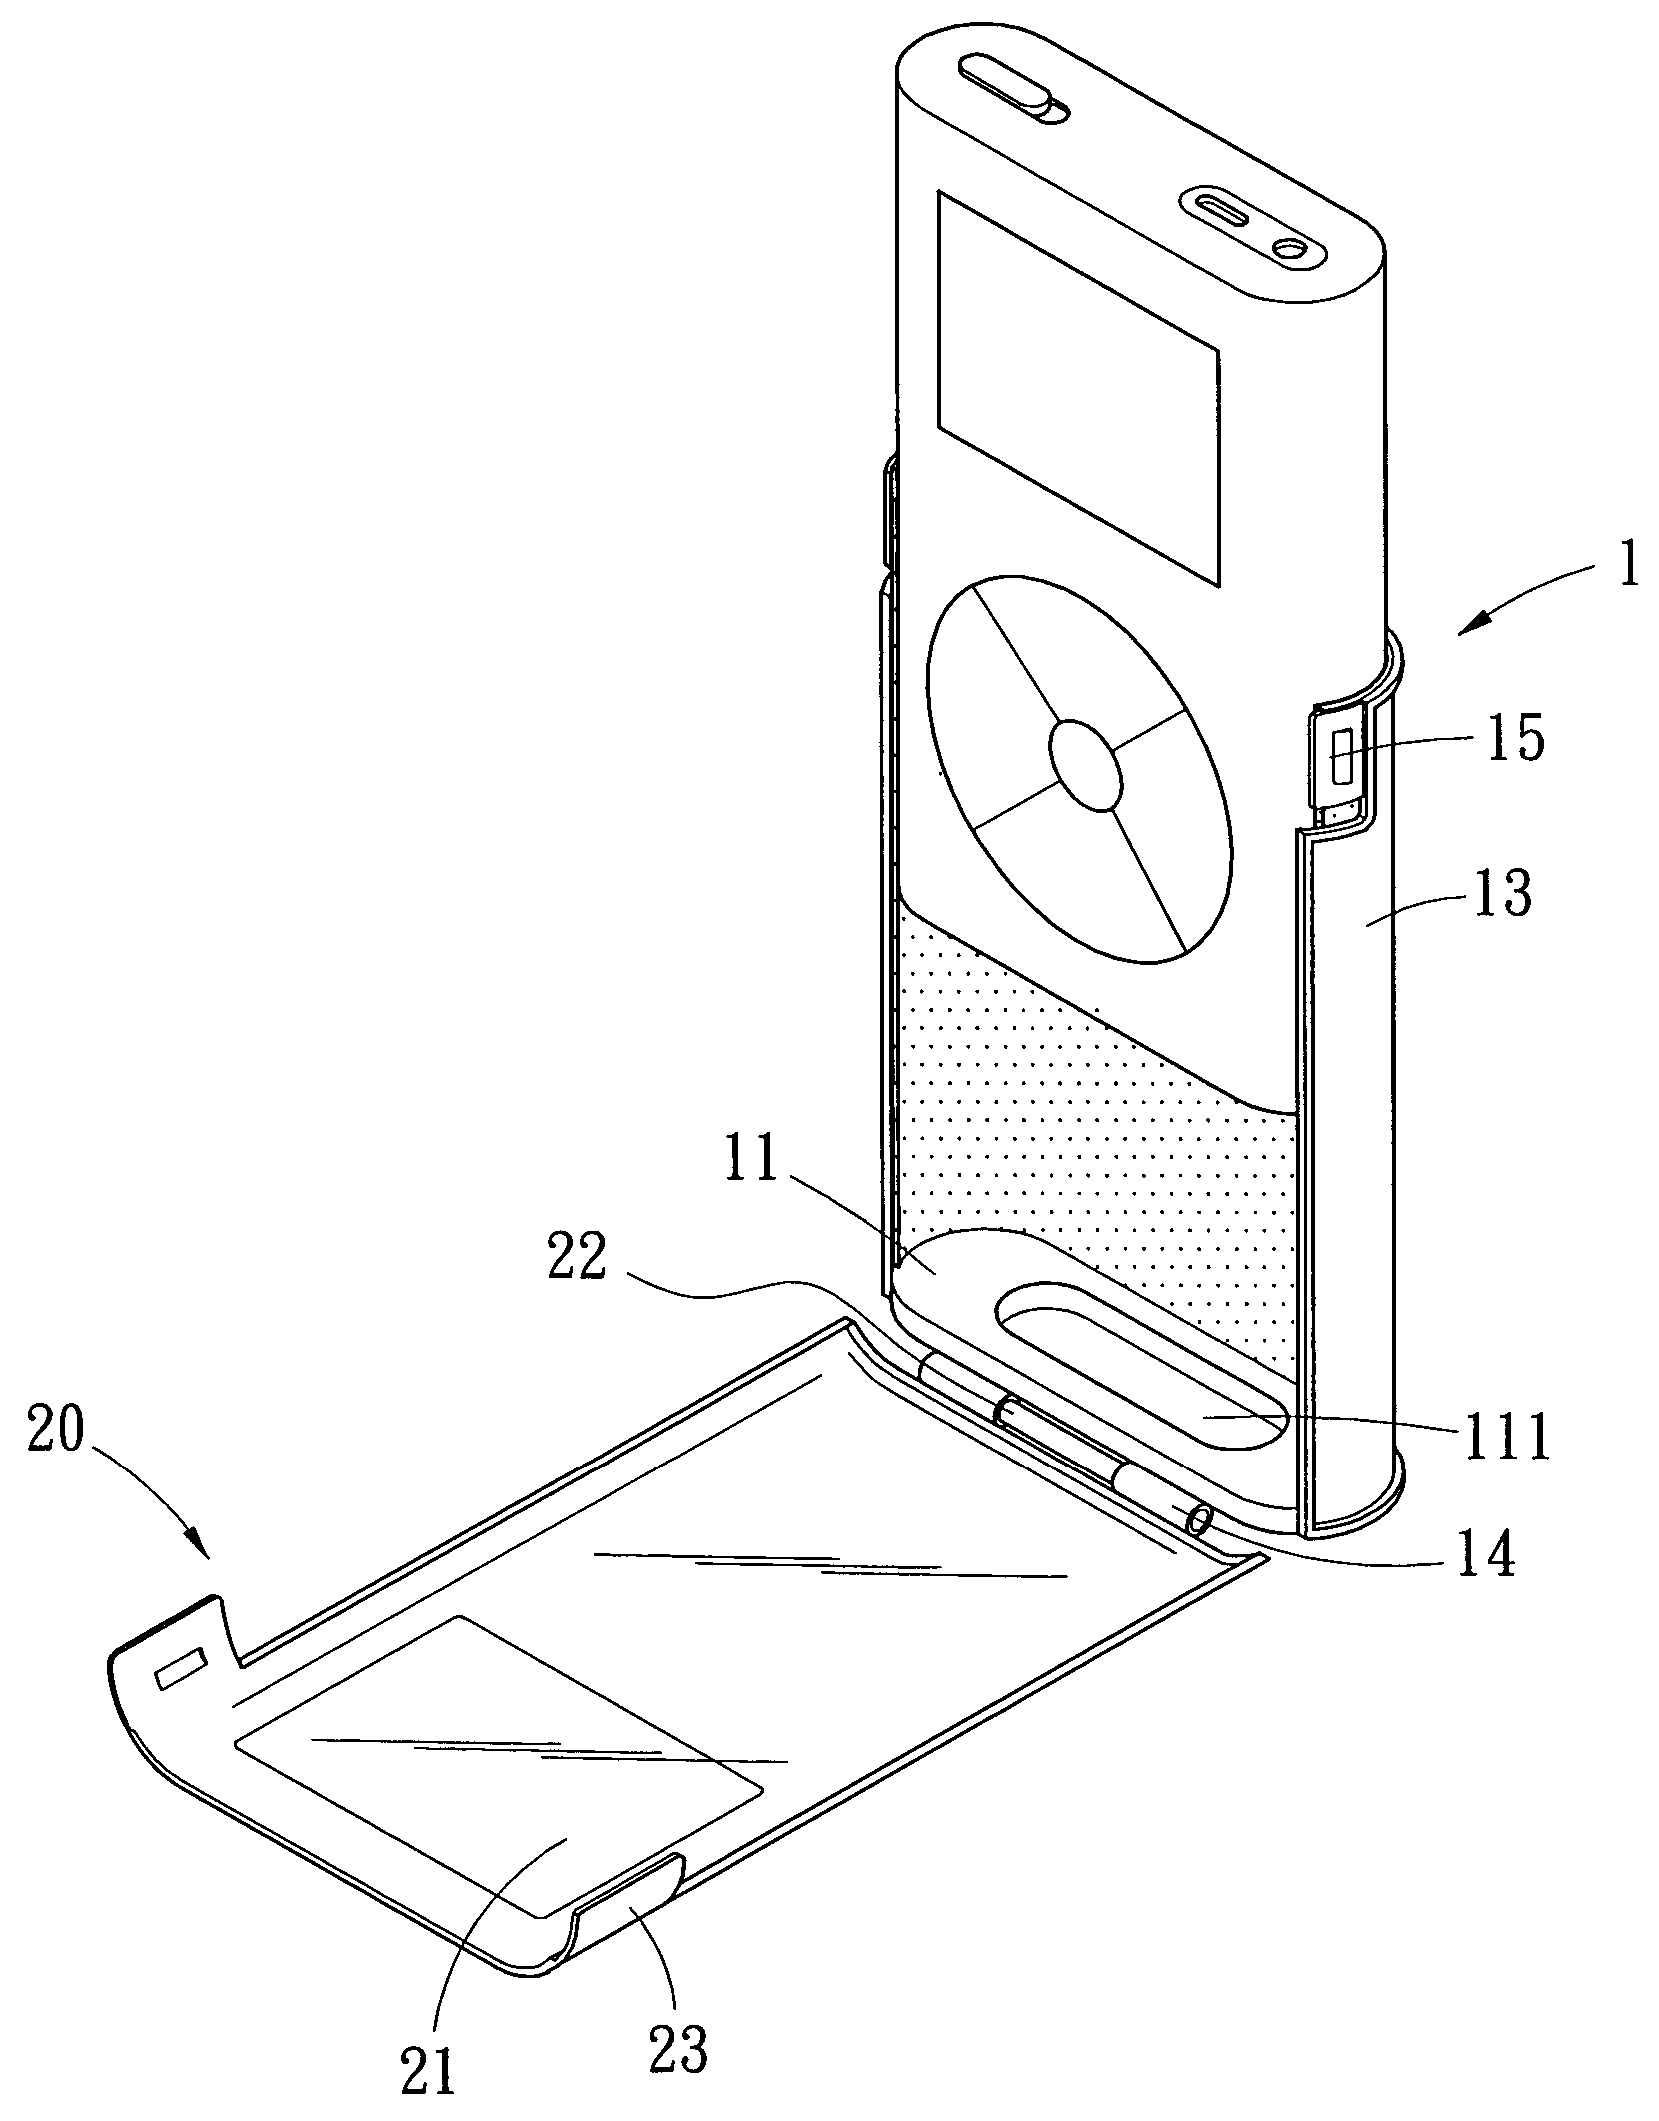 Protection shell for portable video-audio device